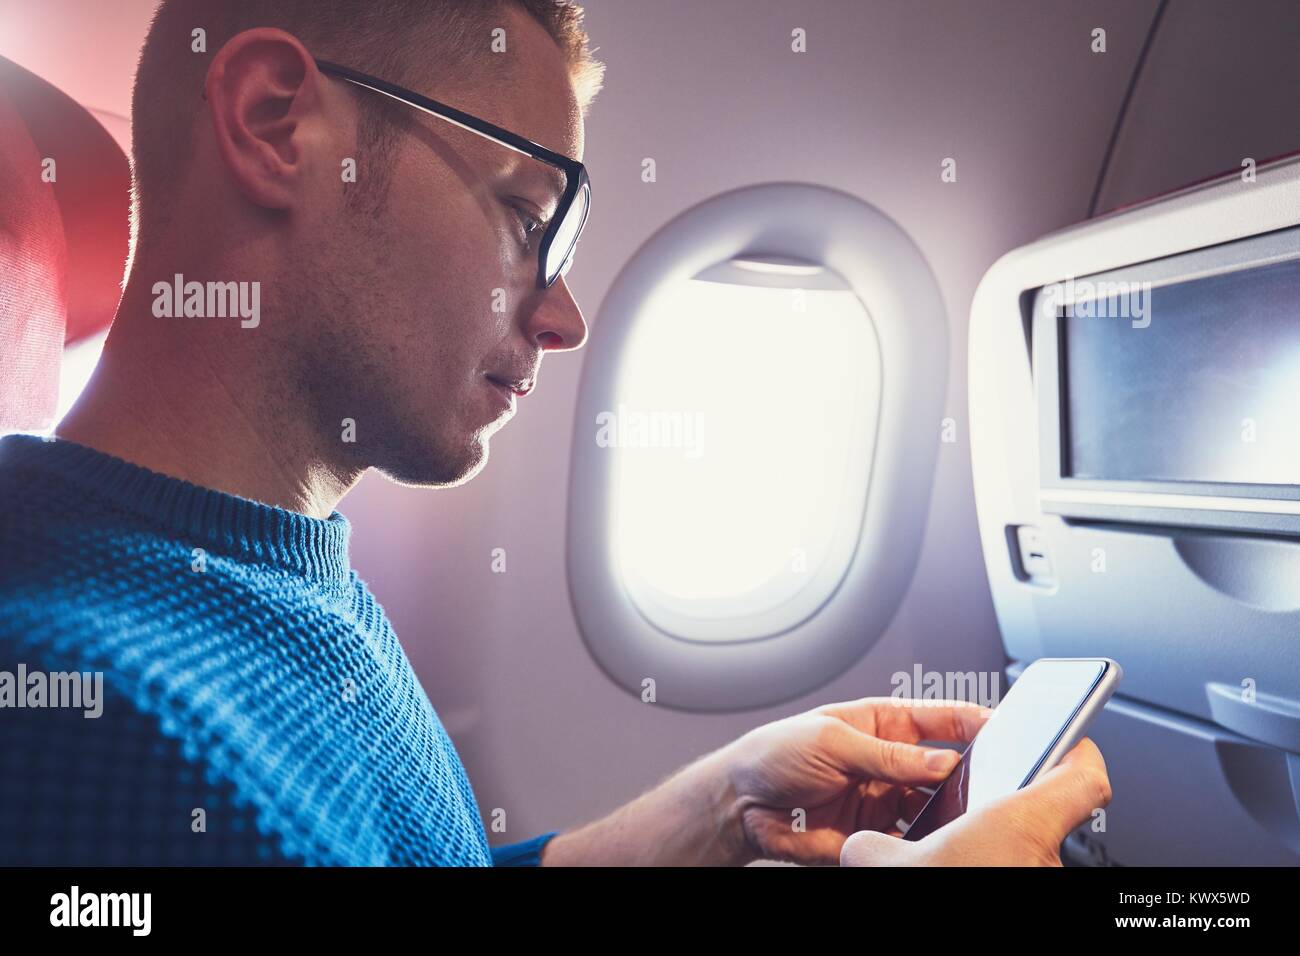 Connection in the airplane. Young passenger (traveler) using smart phone during flight. Stock Photo